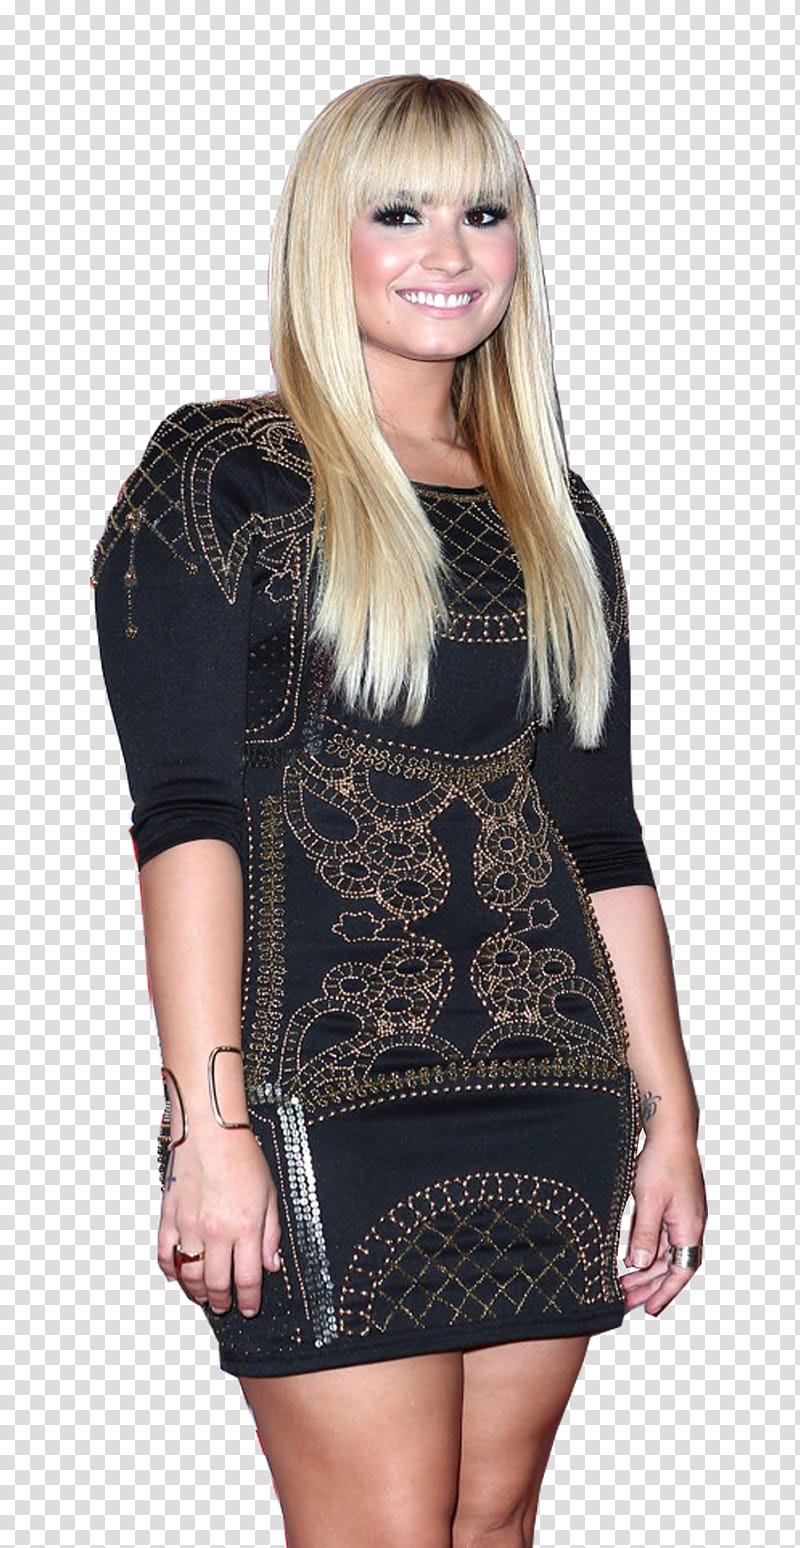 Demi Lovato iHeart radio transparent background PNG clipart